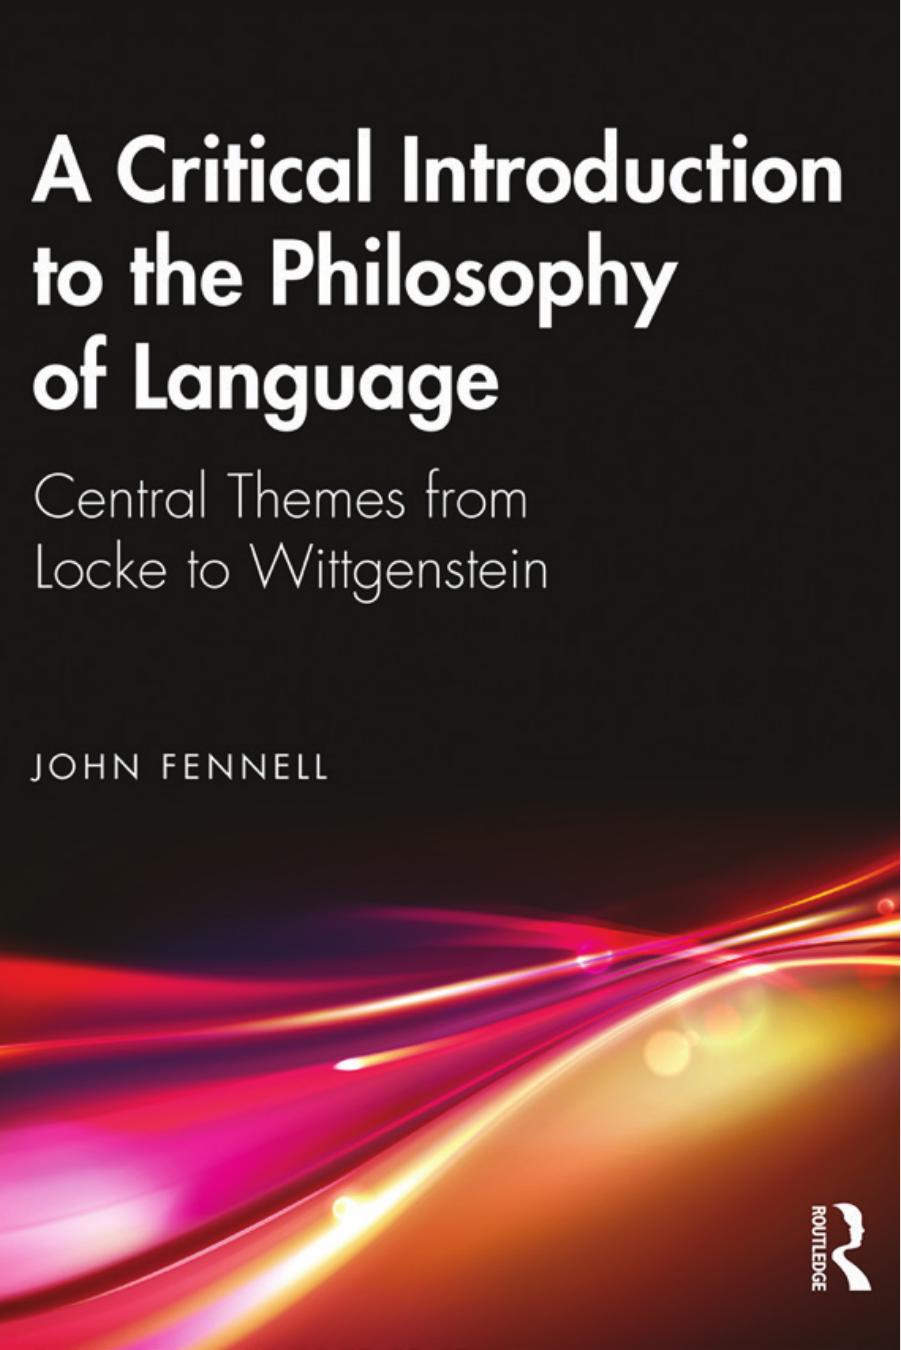 A Critical Introduction to the Philosophy of Language: Central Themes From Locke to Wittgenstein